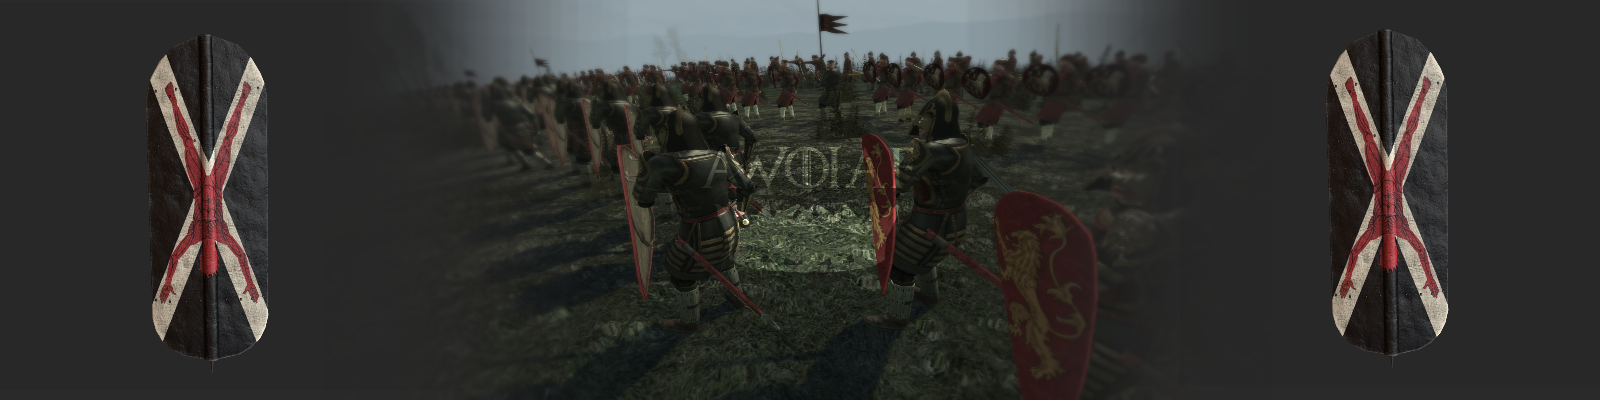 awoiaf_banner.png